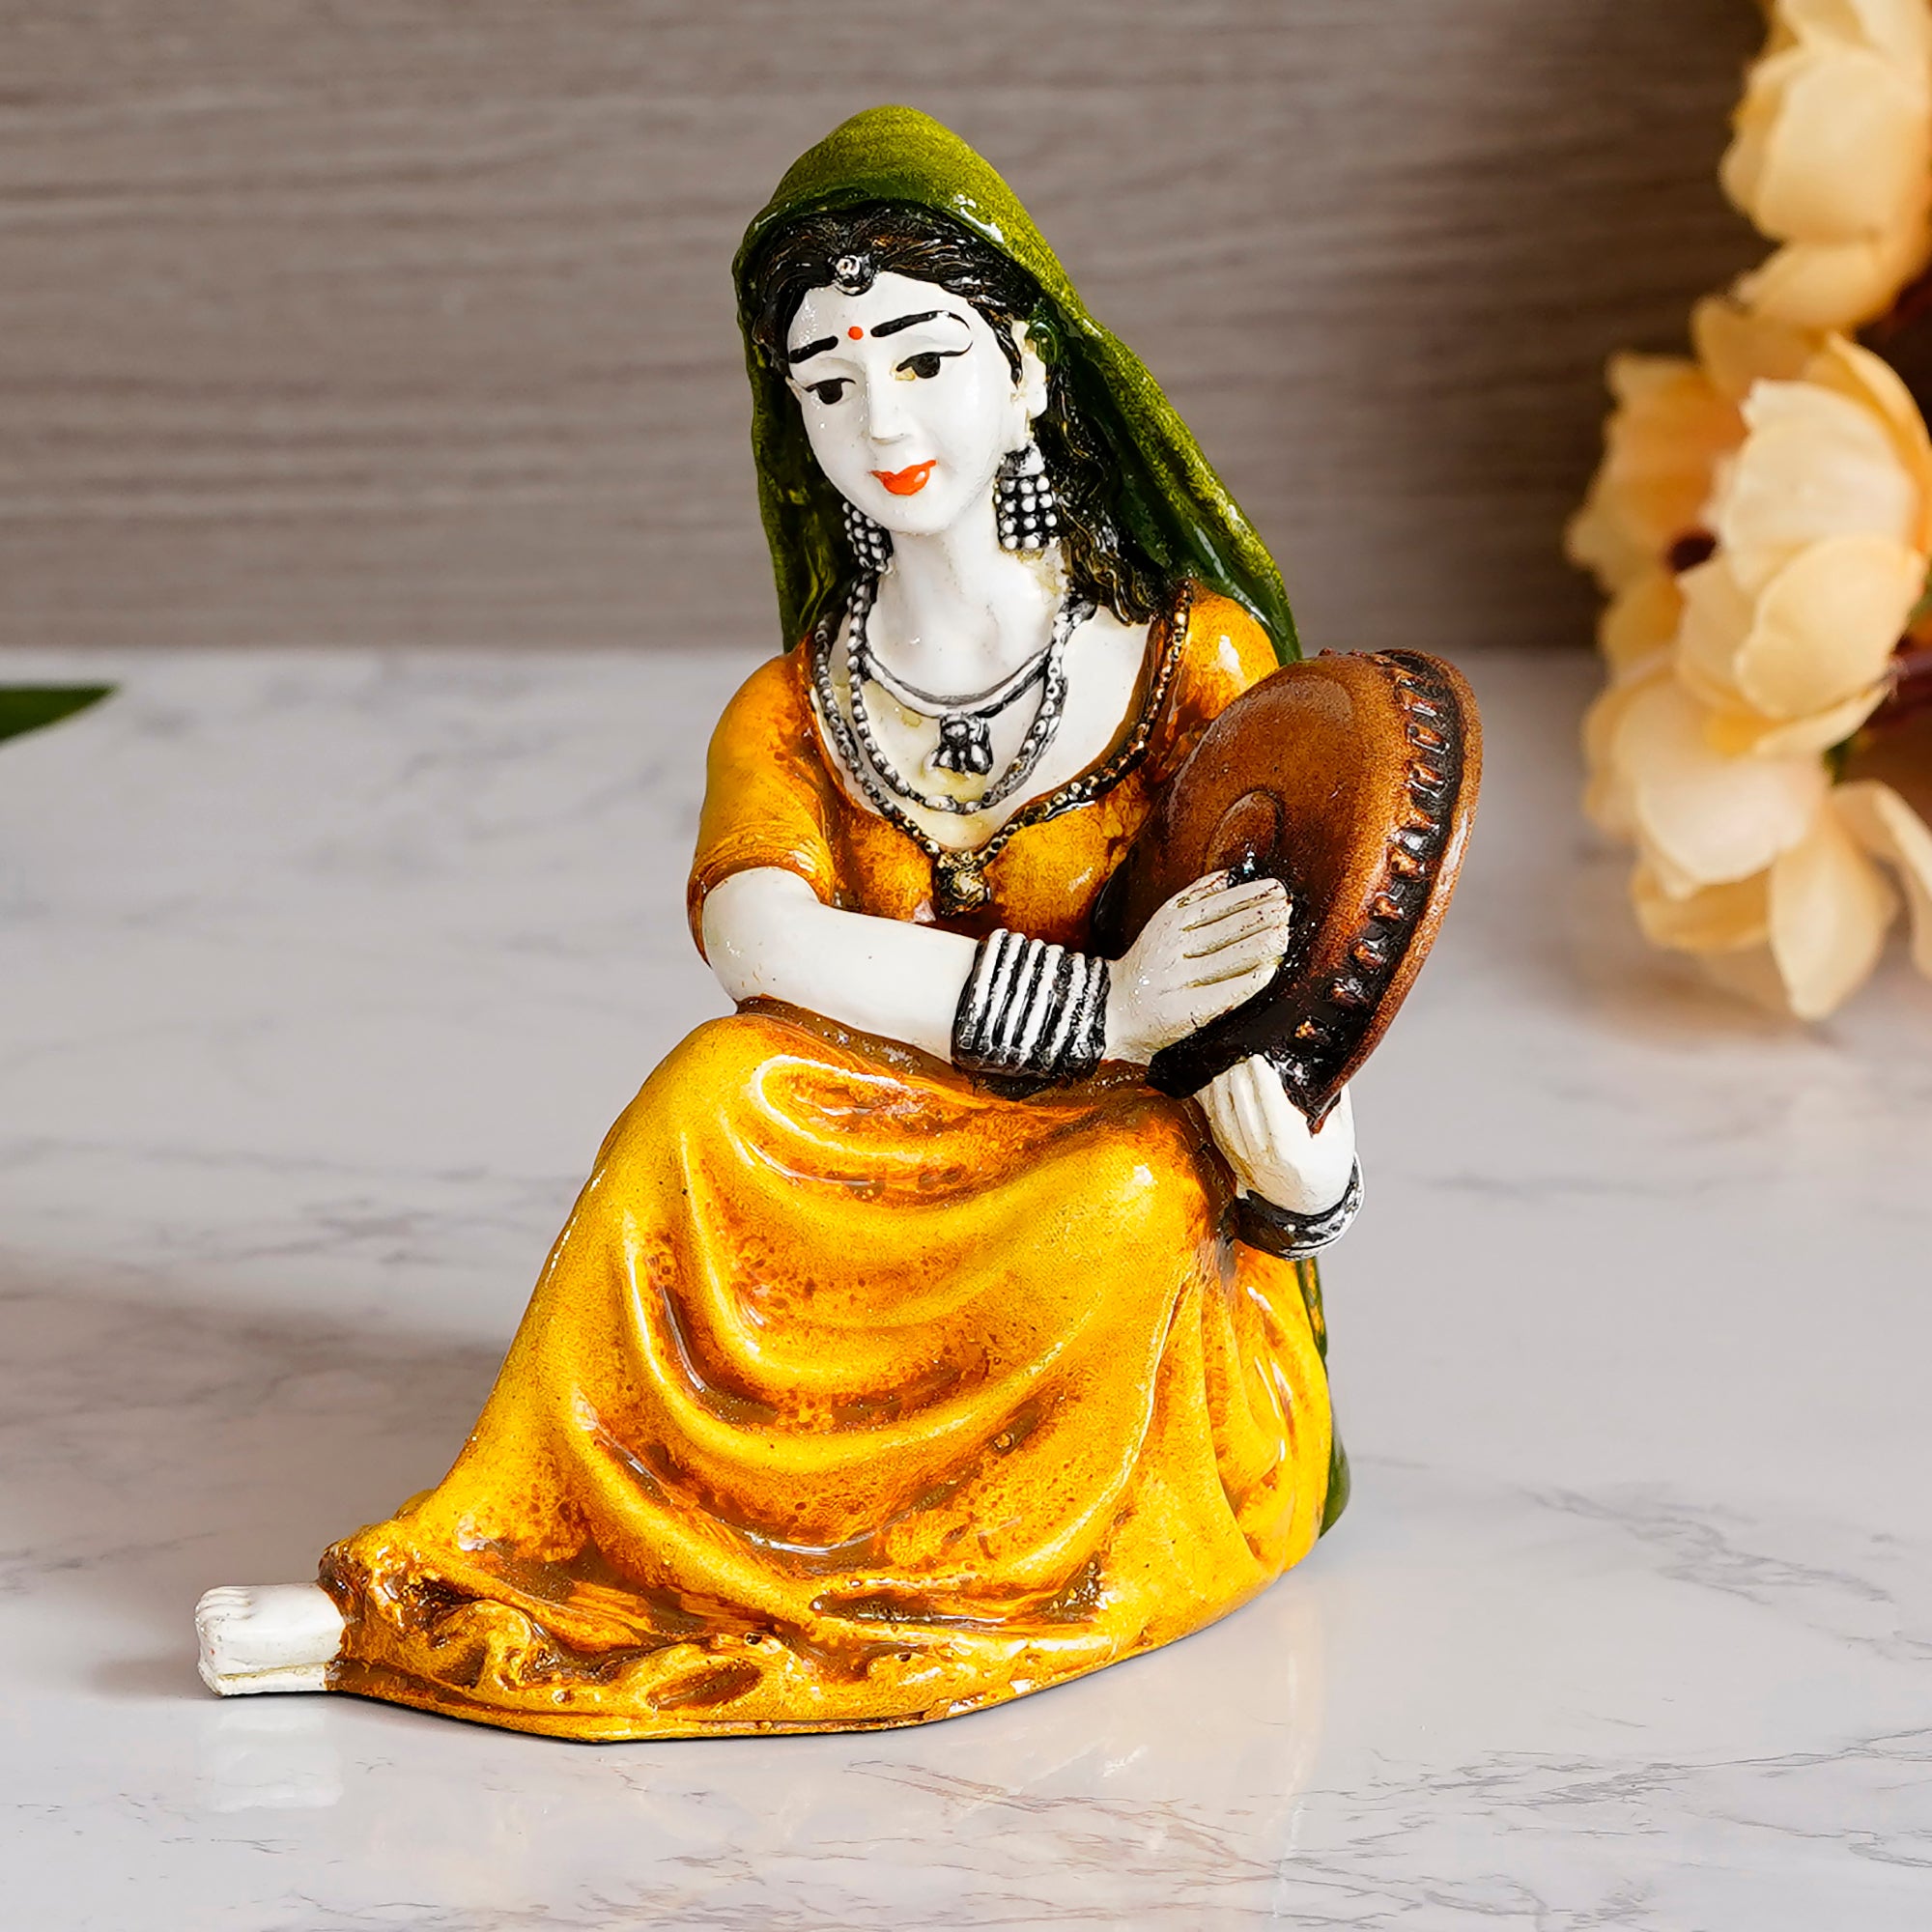 Polyresin Rajasthani Women Statue Playing Musical Instrument Handcrafted Human Figurine Decorative Showpiece